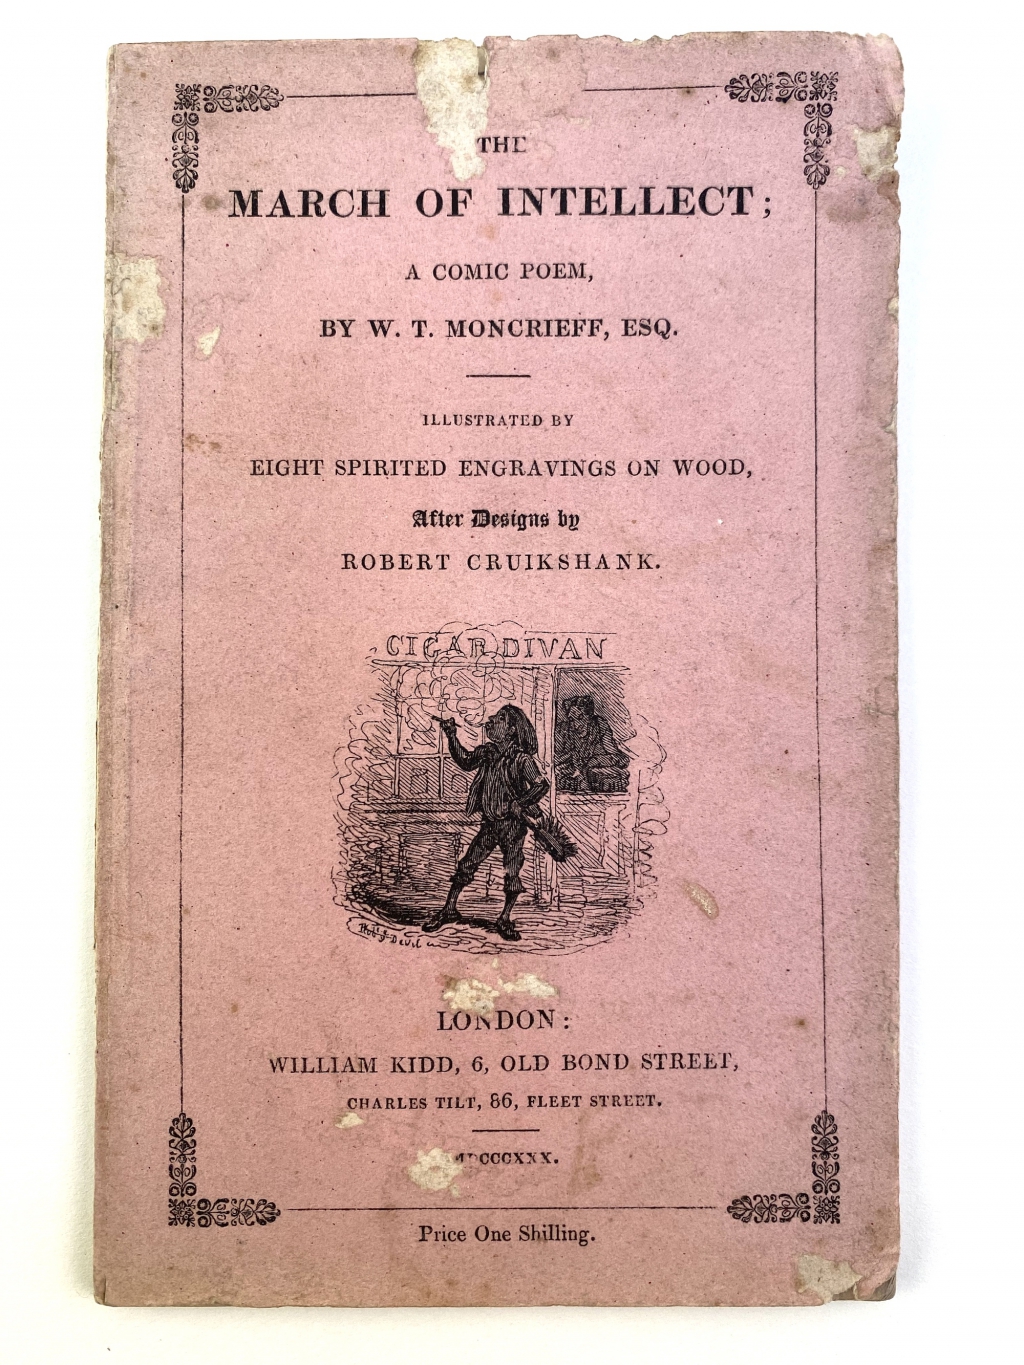 Printed wrapper for The March of Intellect